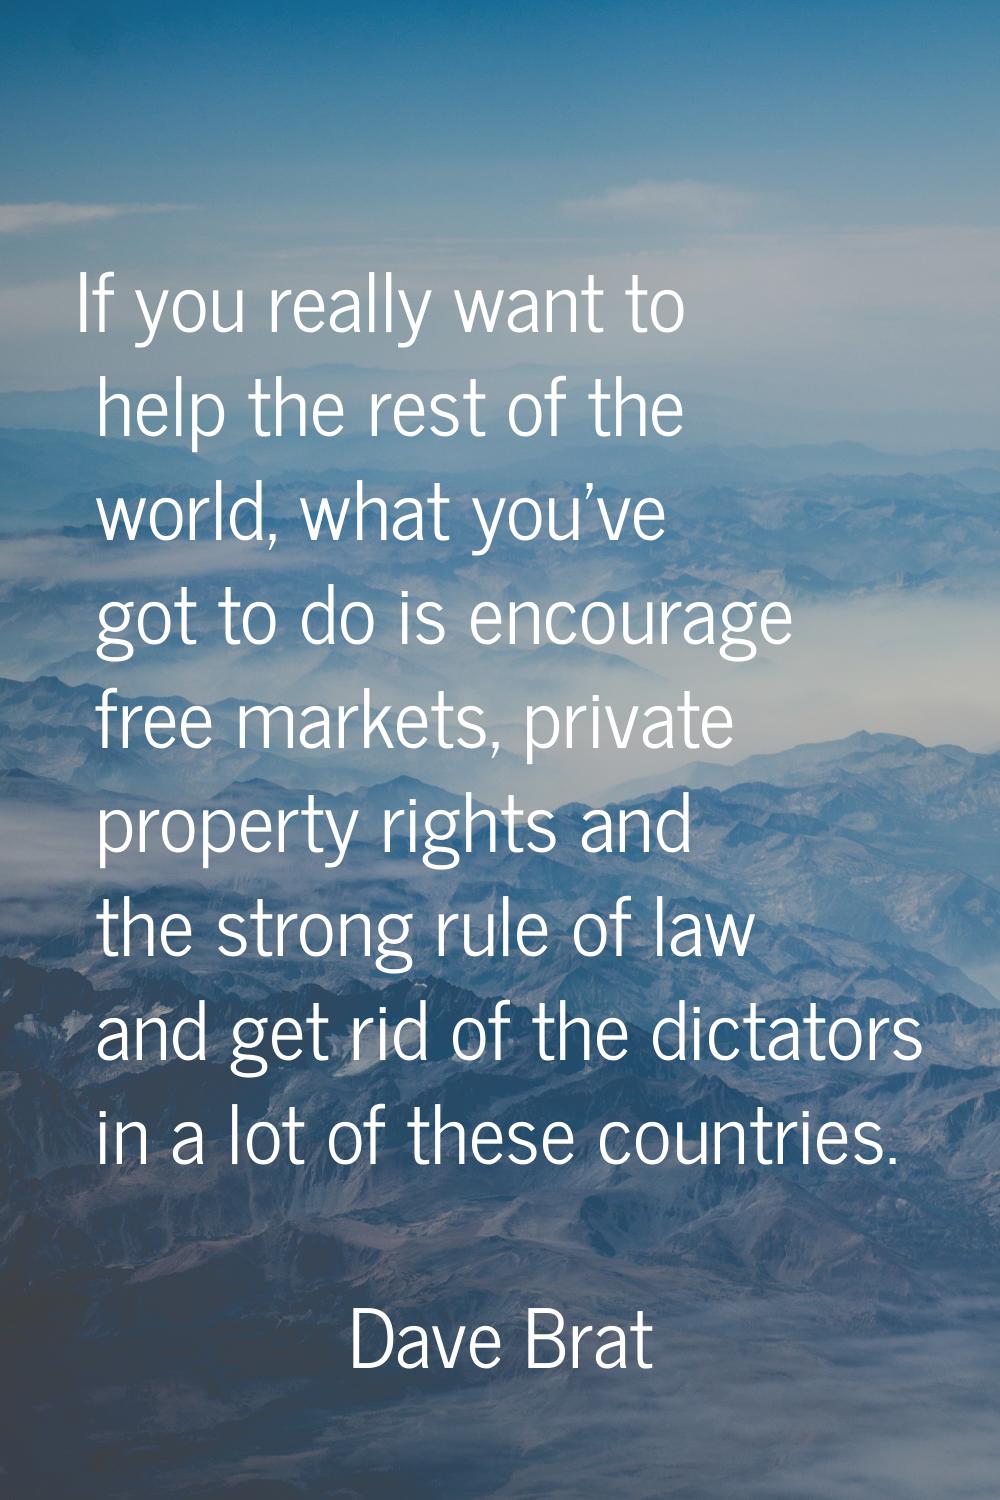 If you really want to help the rest of the world, what you've got to do is encourage free markets, 